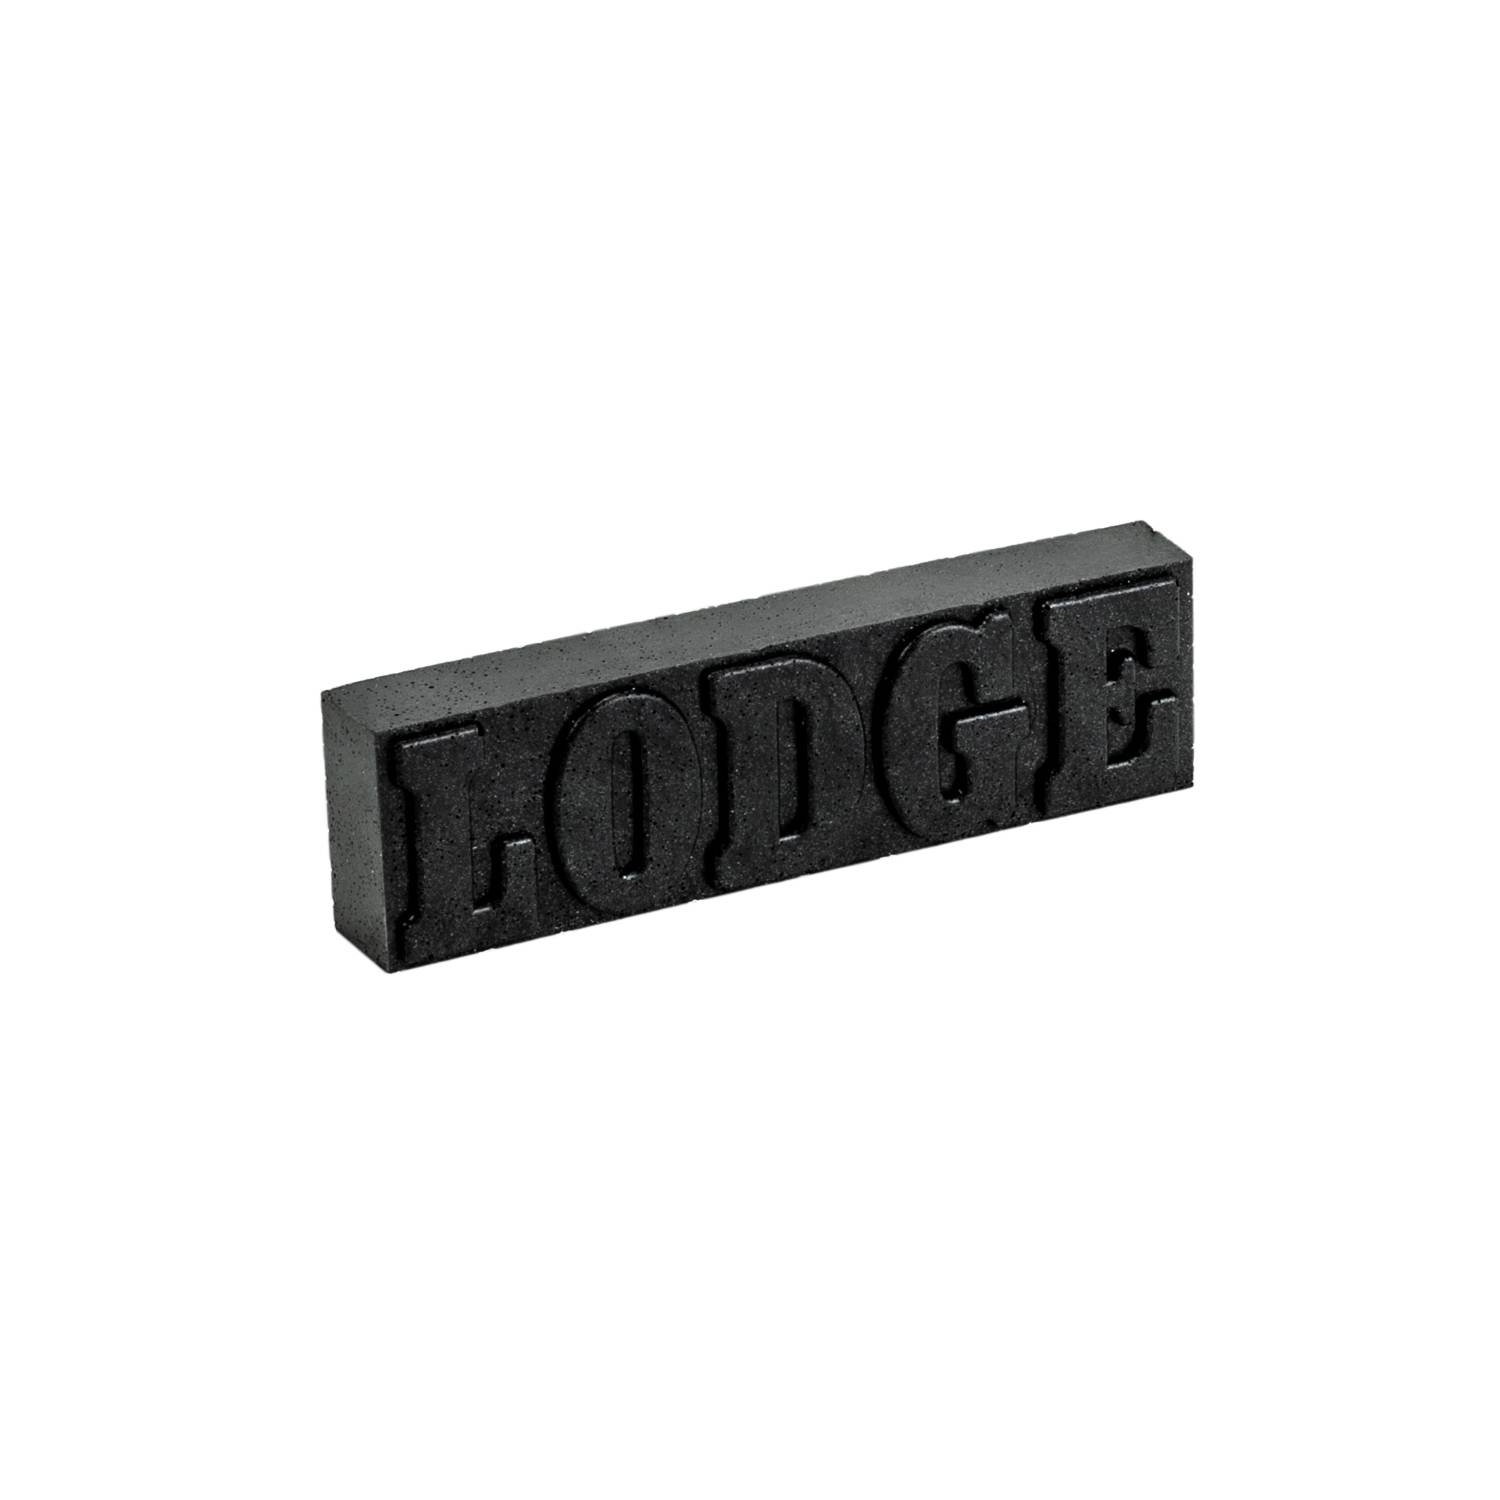 Lodge Rust Eraser Black, Cleaners, Cleaning, Houseware, Household